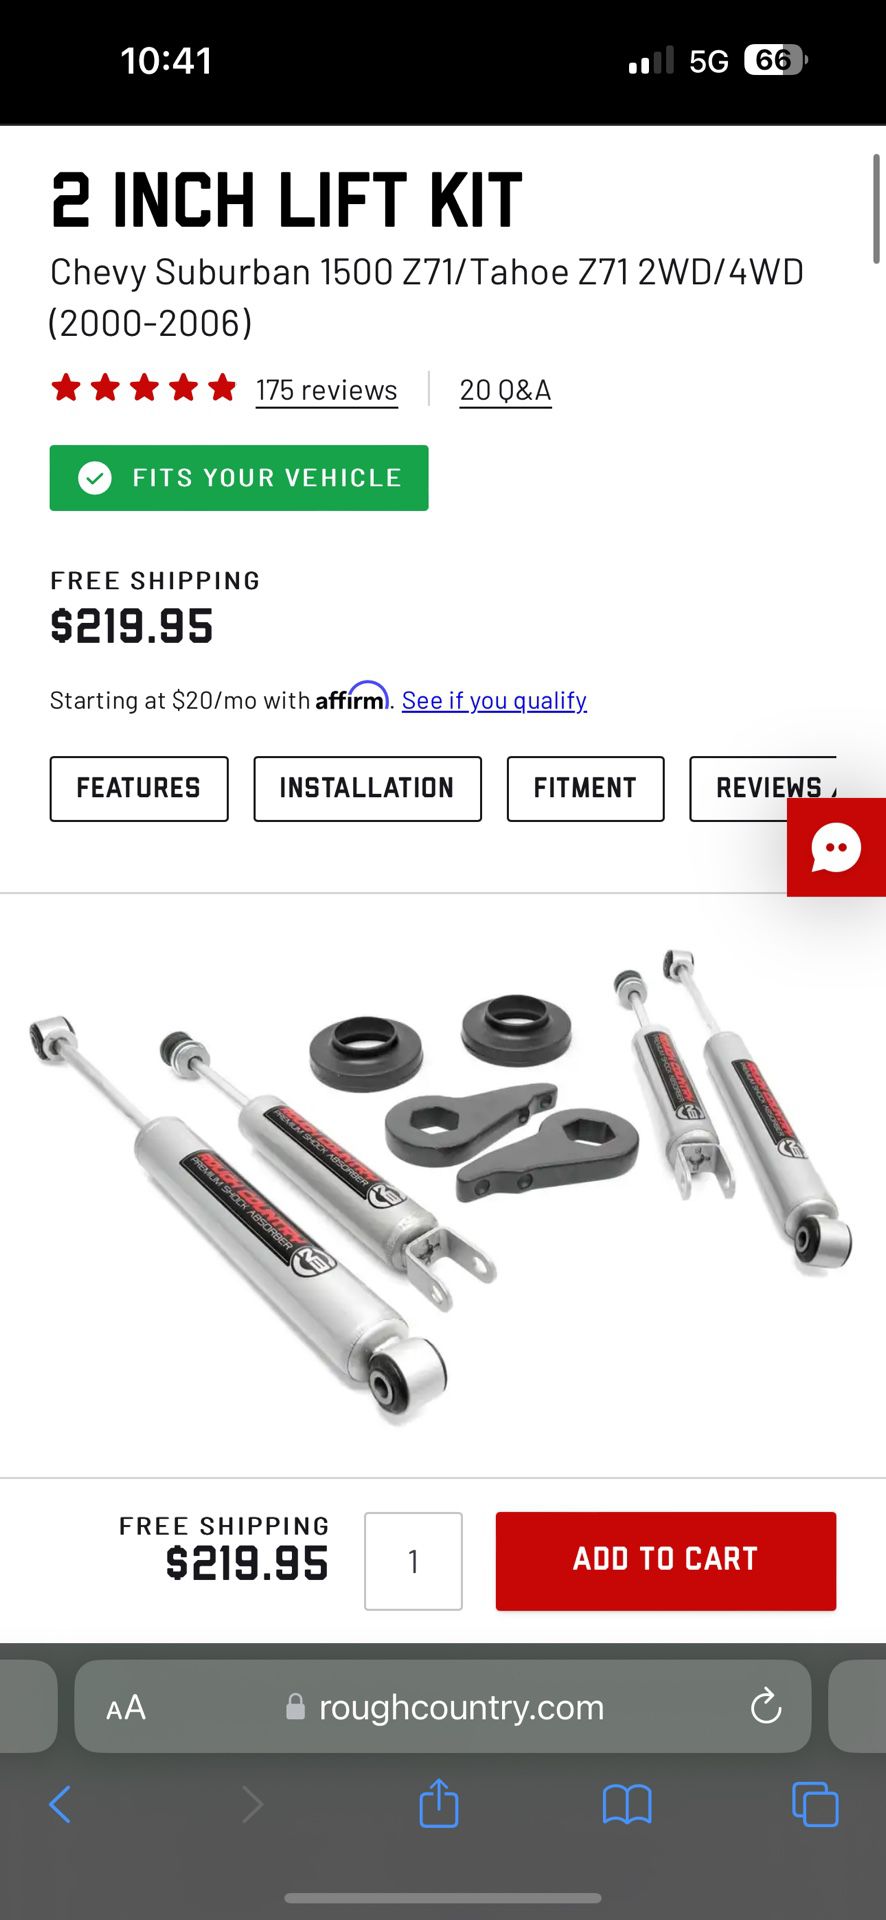 Rough Country 2 inch lift kit 